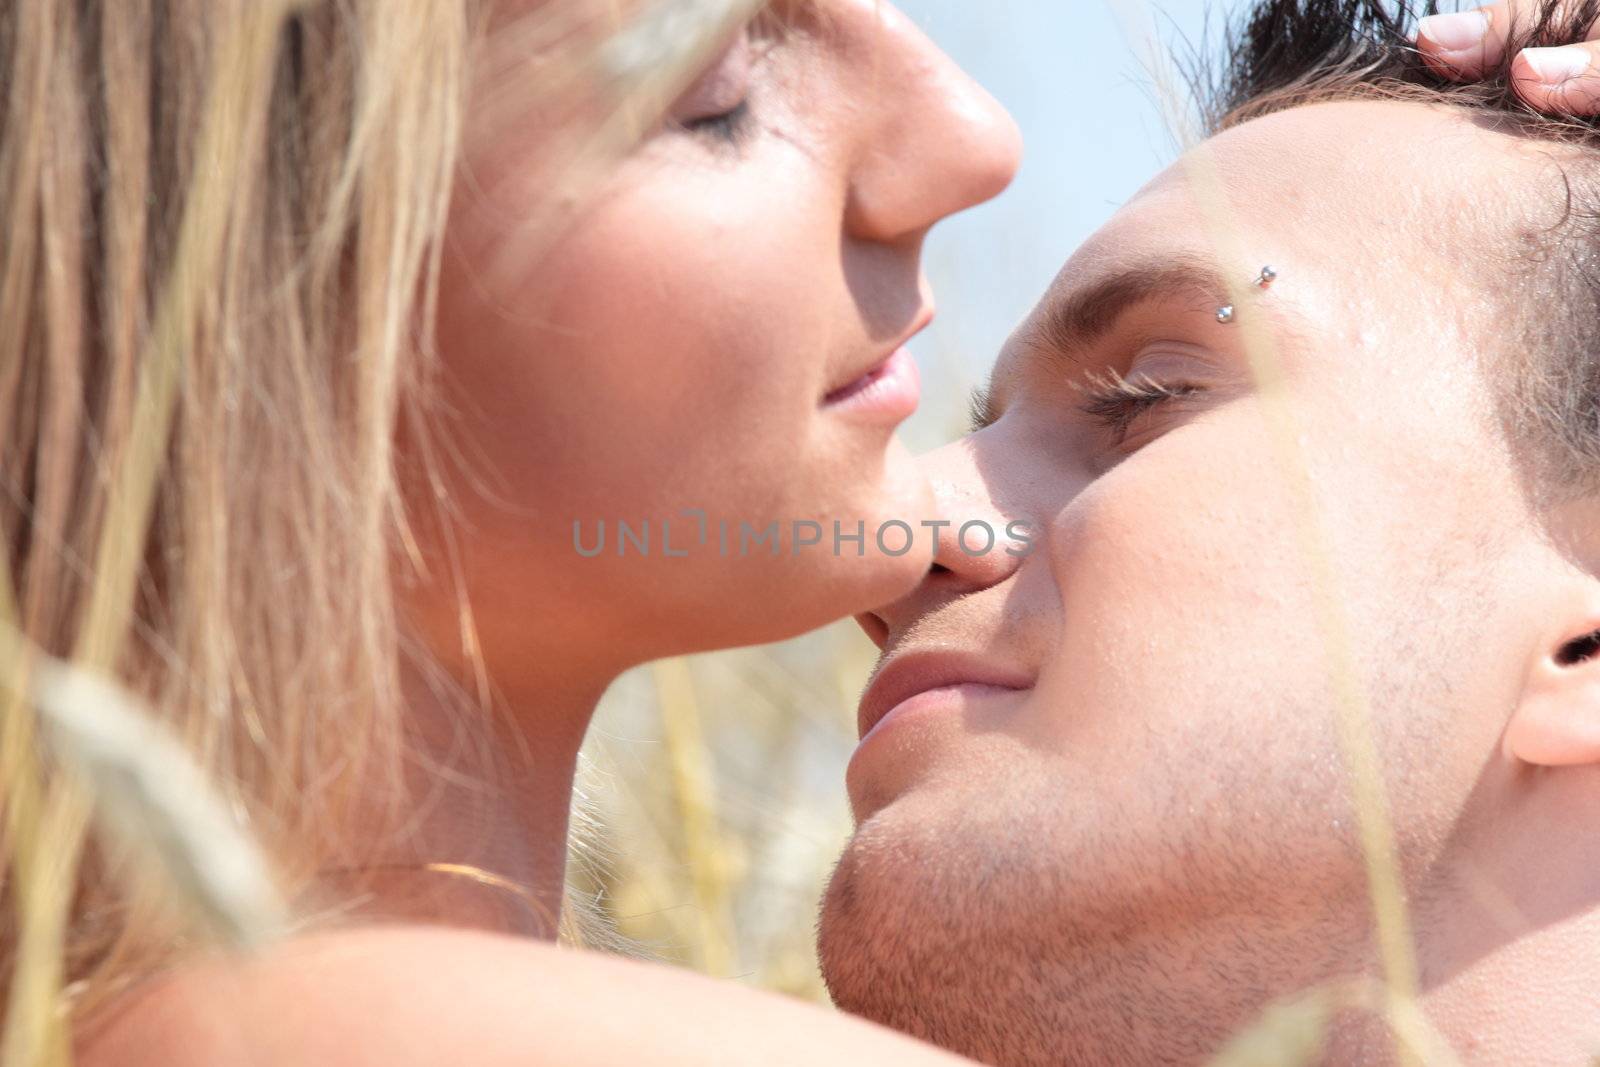 A beautiful couple sitting an kissing in wheat field